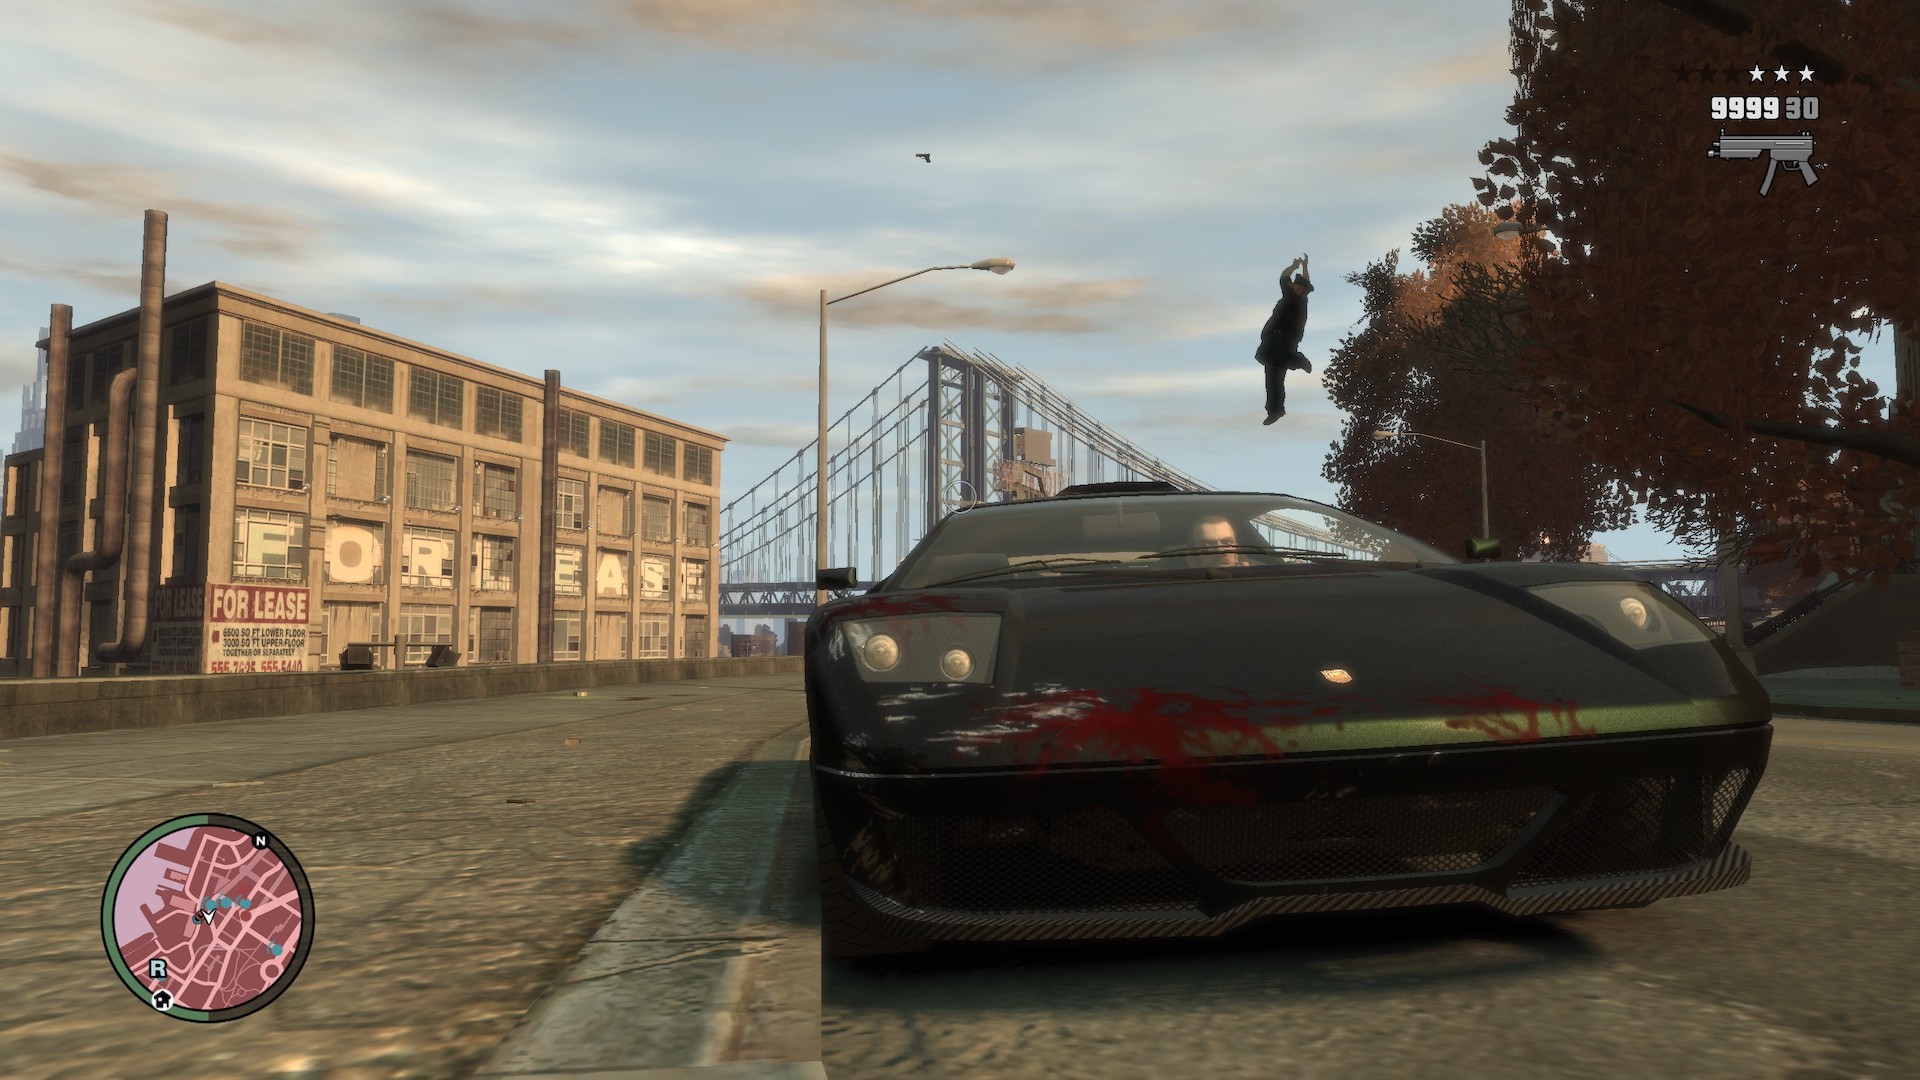 GTA IV in Liberty City with a cop in the air